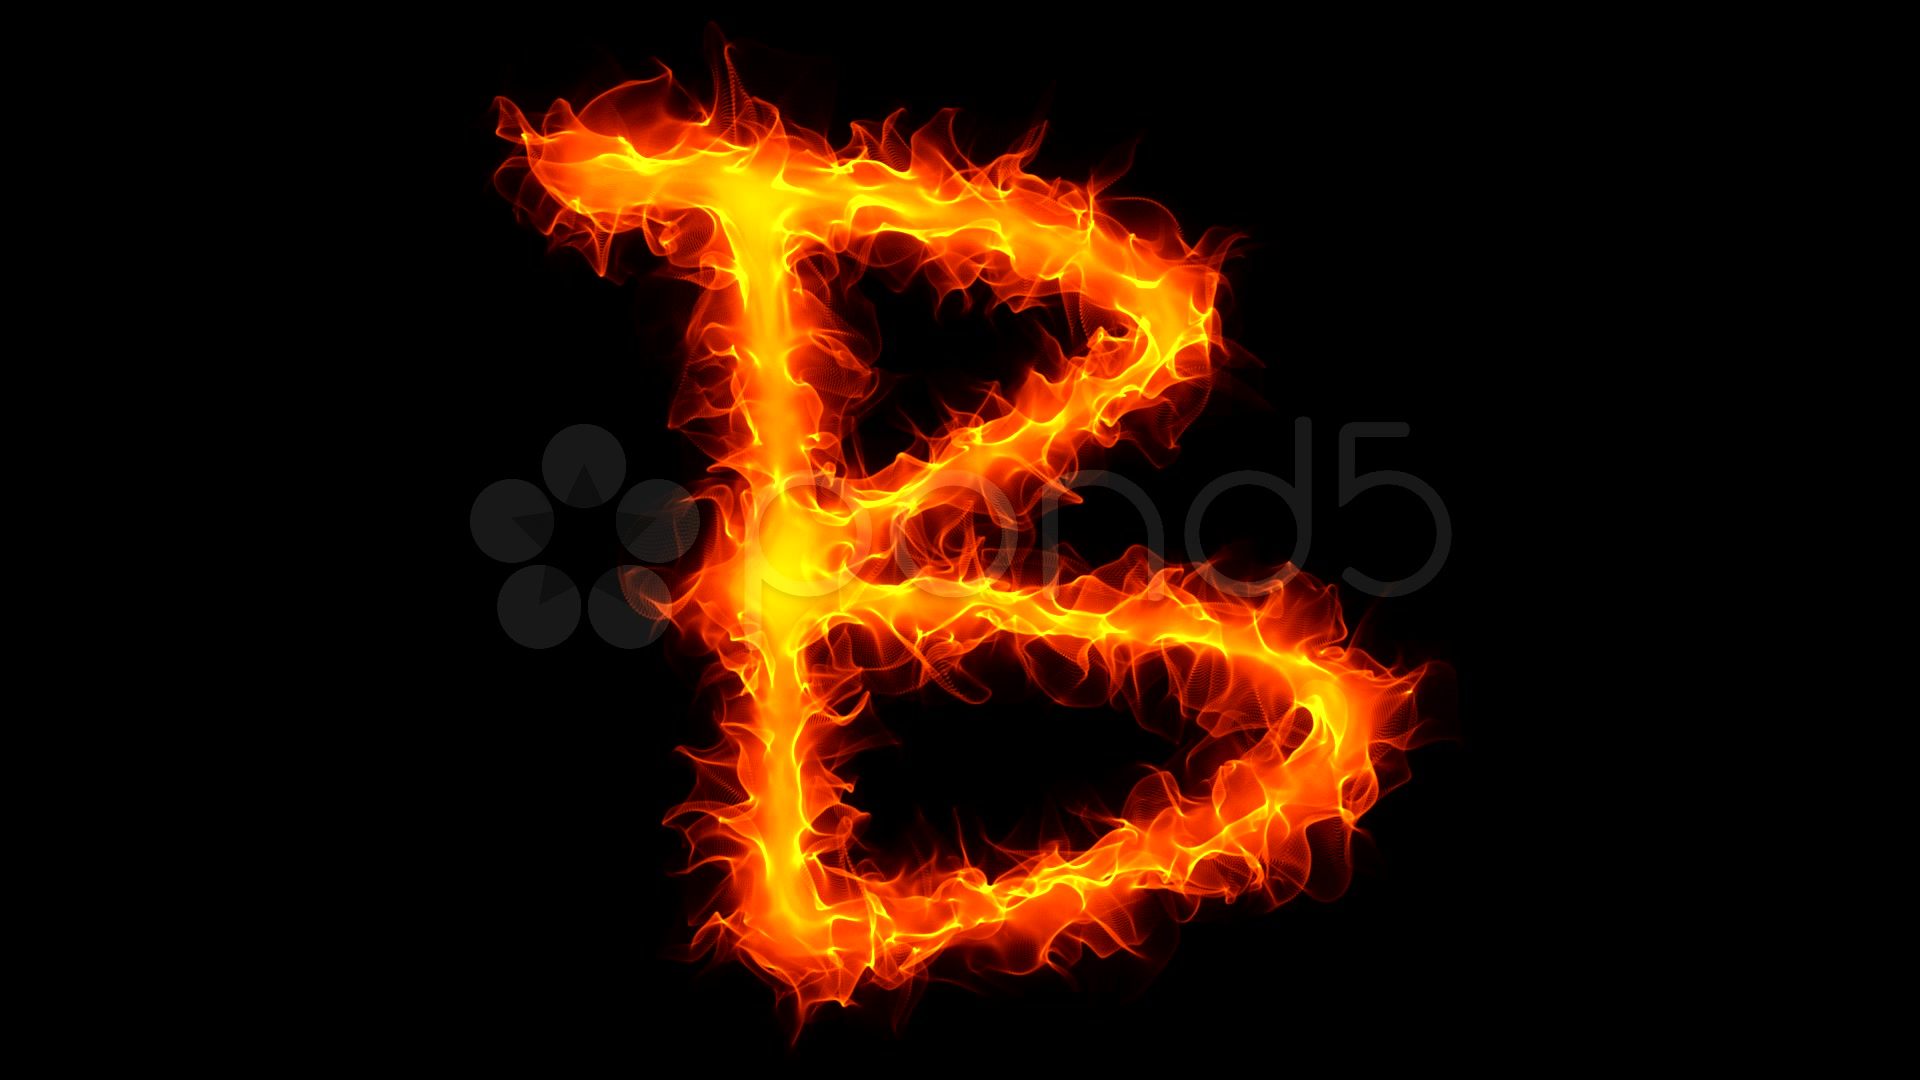 Free Download Letter B Wallpaper Fire Letter B Graffiti 1920x1080 For Your Desktop Mobile Tablet Explore 48 Letter B Wallpaper Love Letter Wallpaper Chinese Letters Wallpaper Alphabet Letters Wallpapers Just send us the new letter b wallpaper you may have and we will publish the best ones. free download letter b wallpaper fire